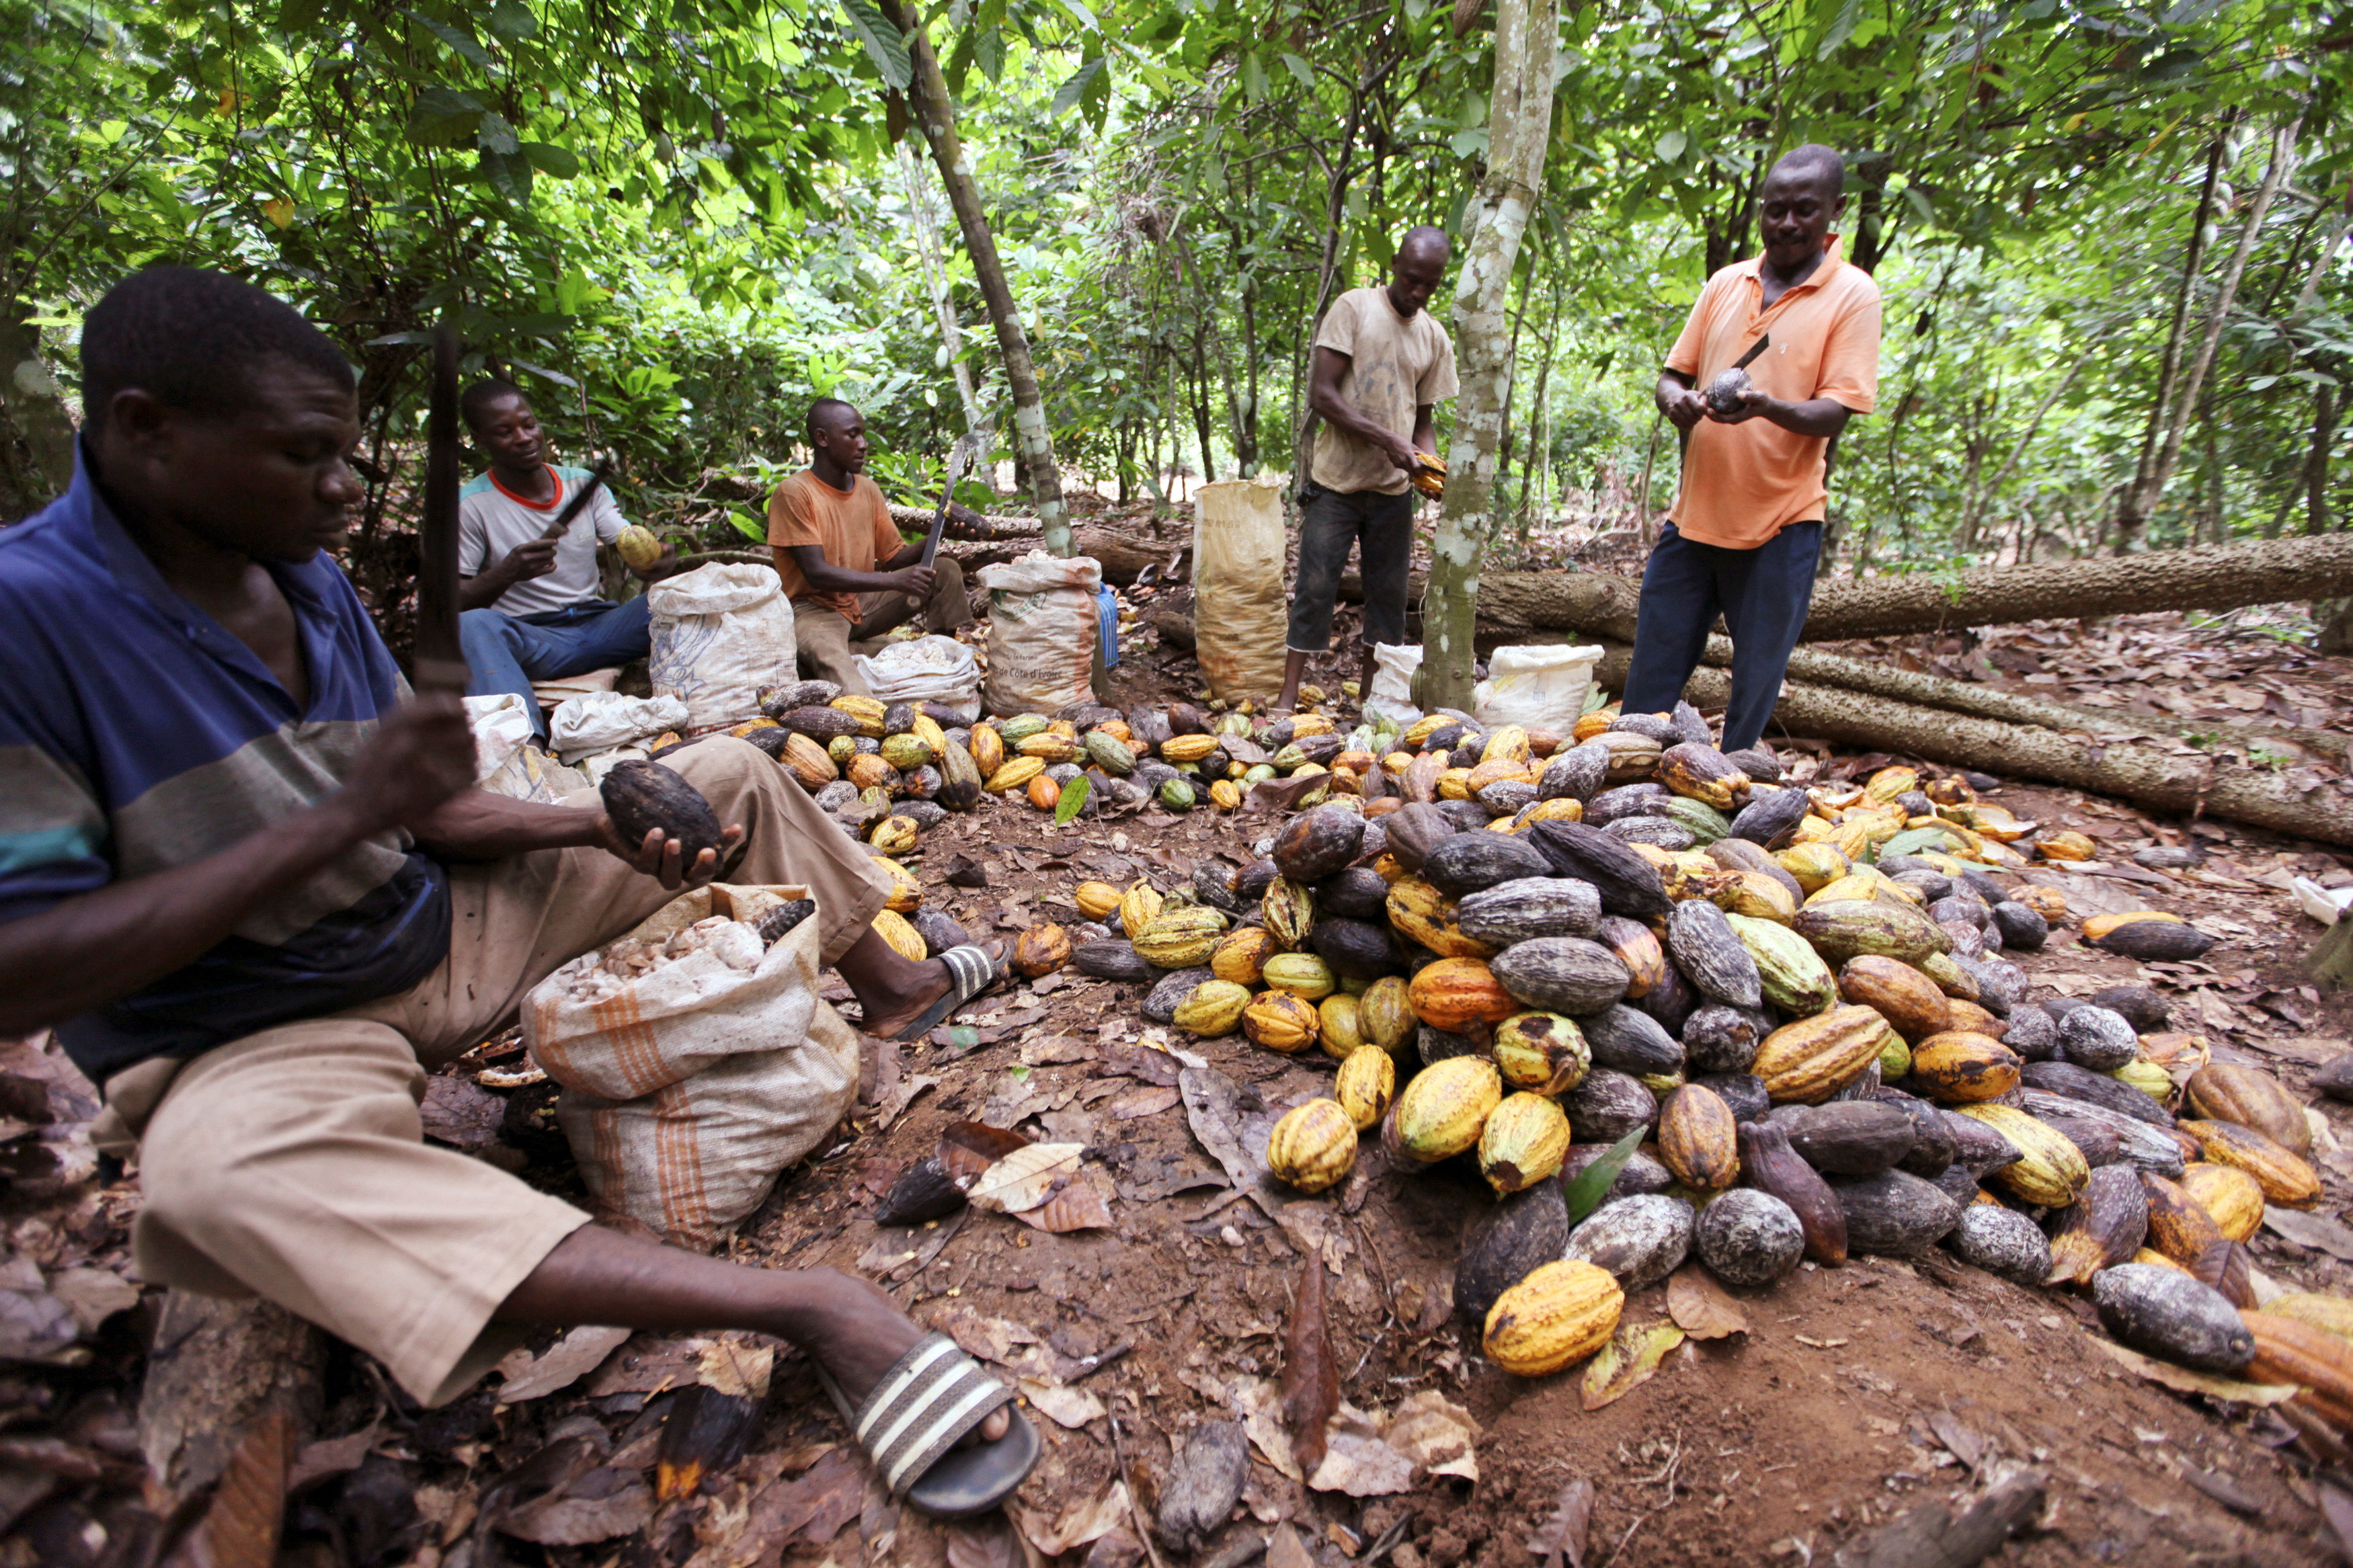 Farmers separate infected cocoa beans from a pile at a farm in San Pedro